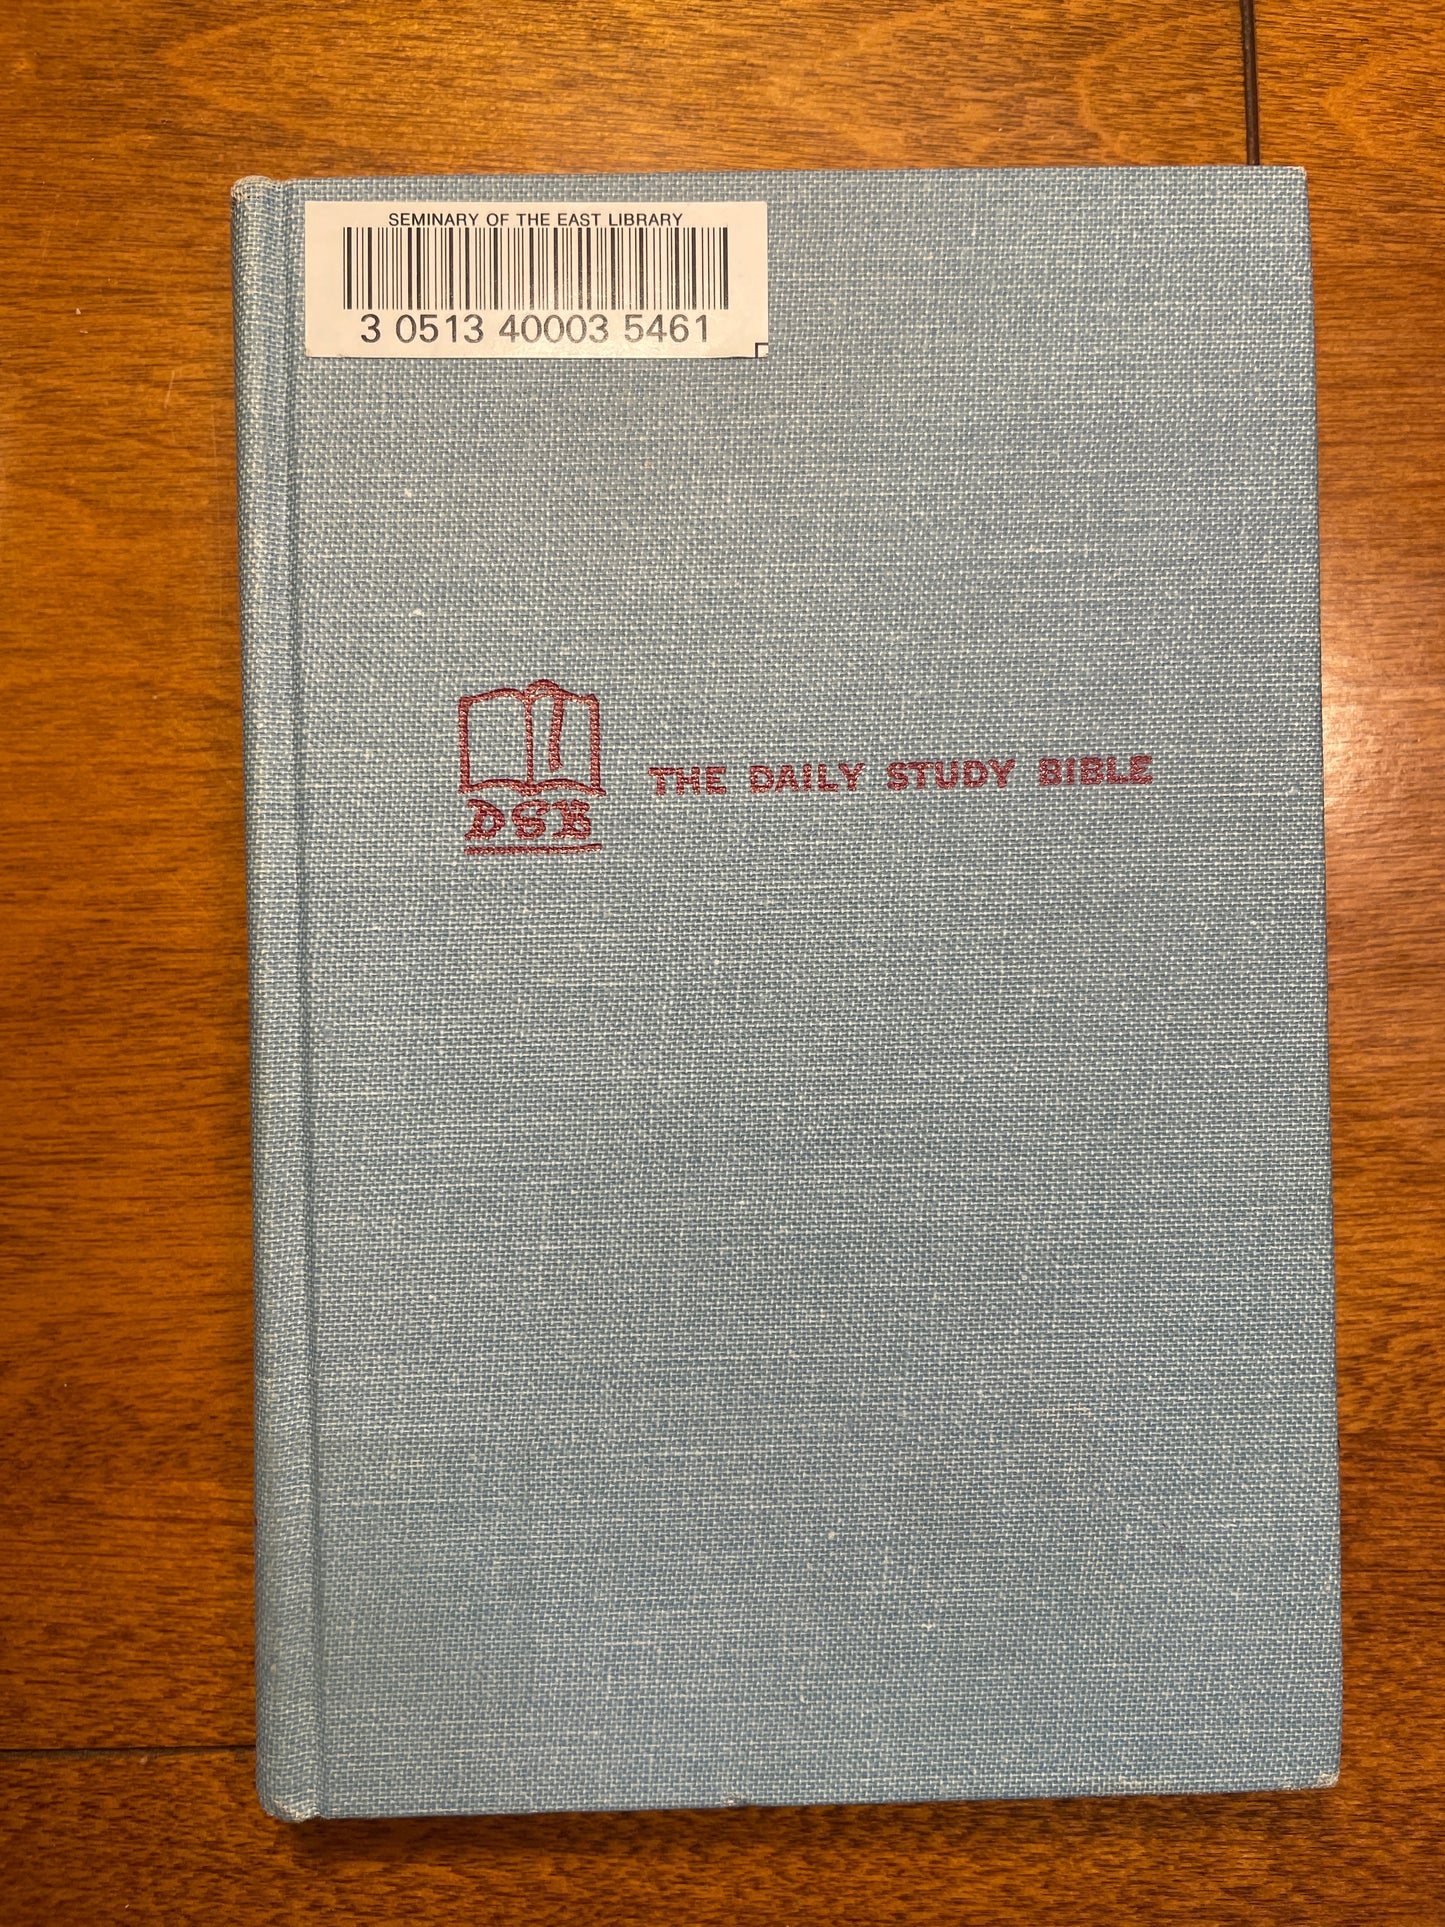 The Daily Study Bible, The Revelation of John Vol 1 & 2, (All Chapters)